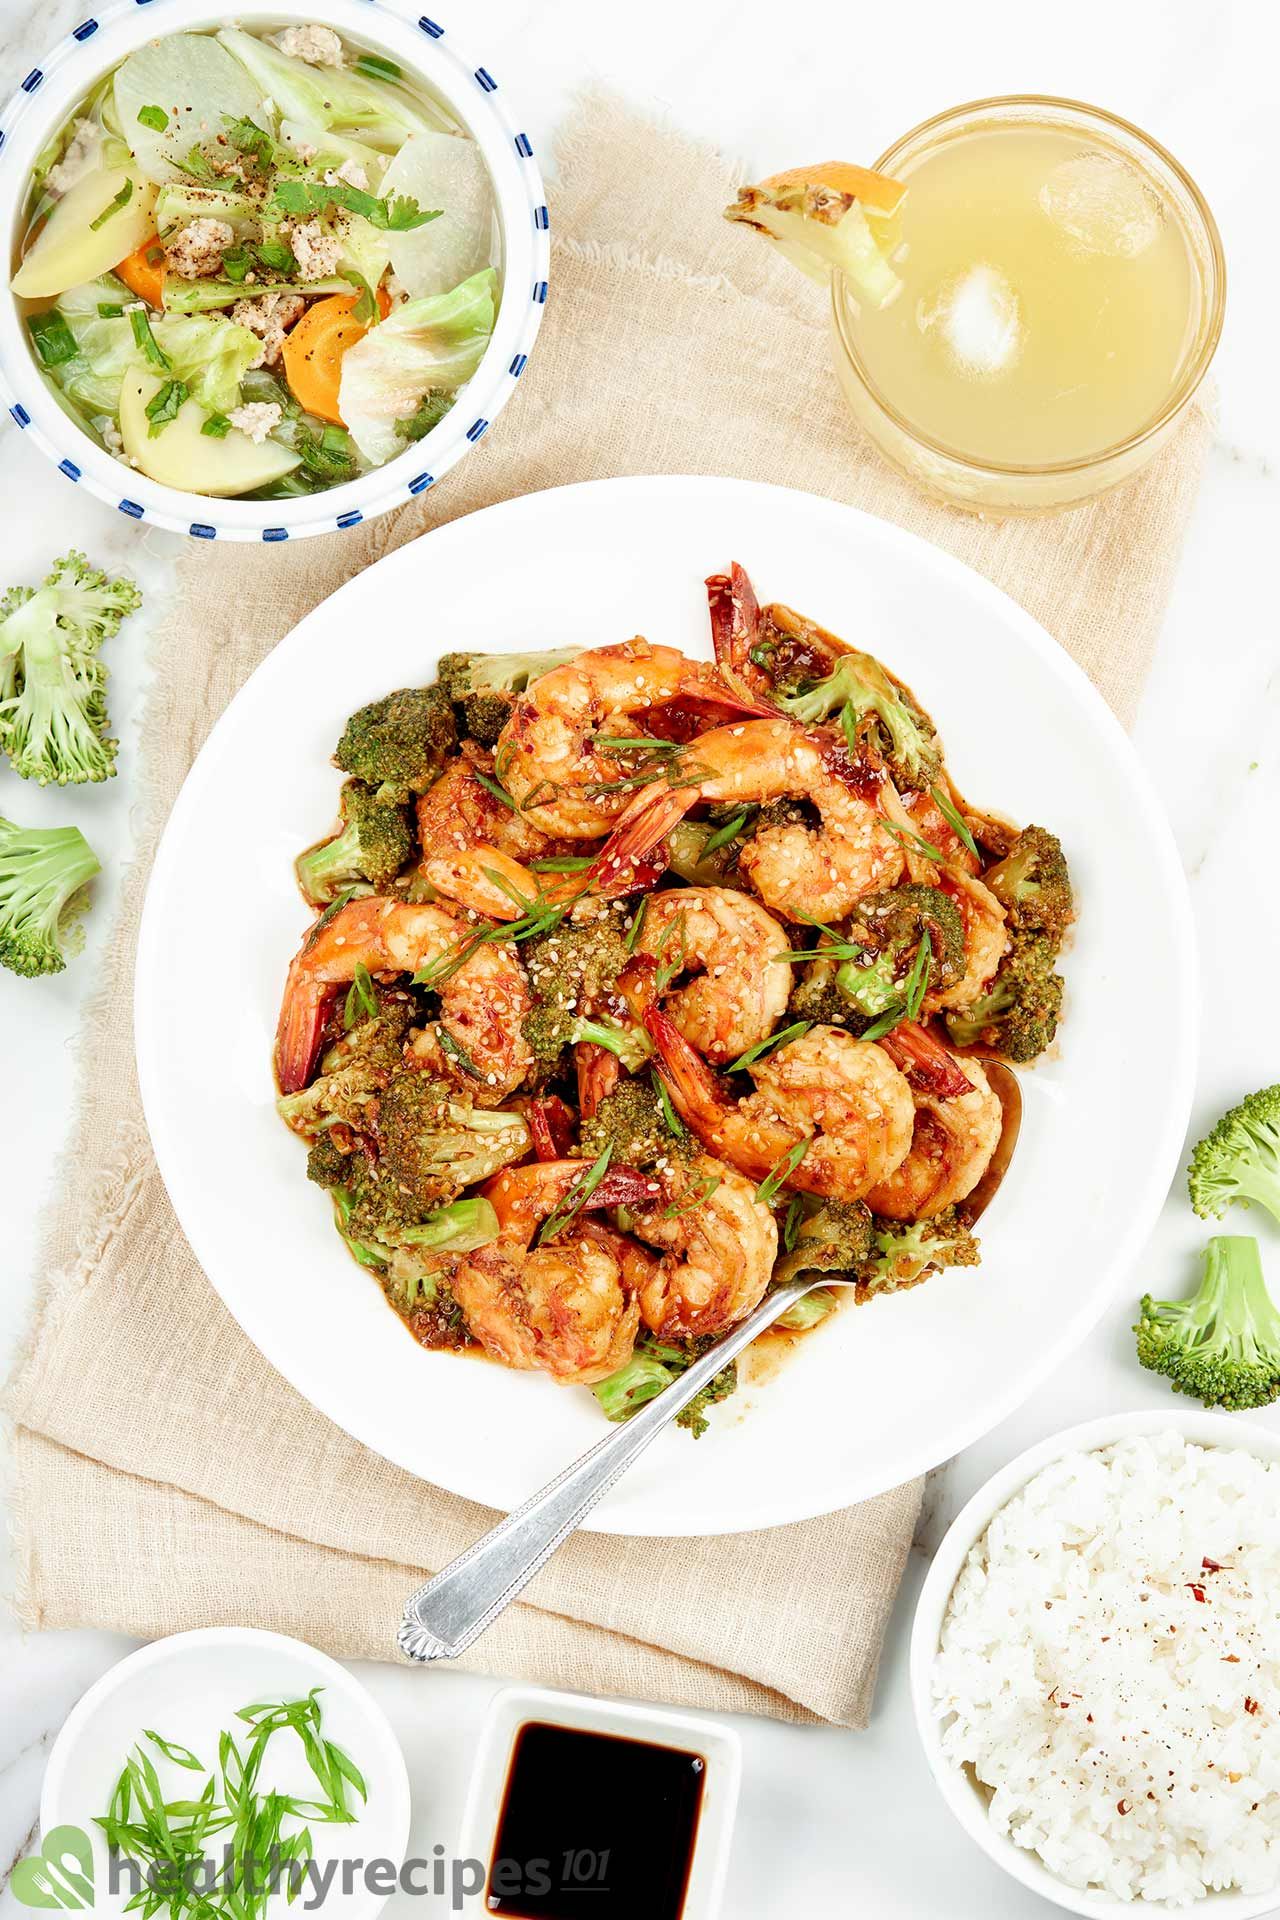 What to Serve with Shrimp And Broccoli